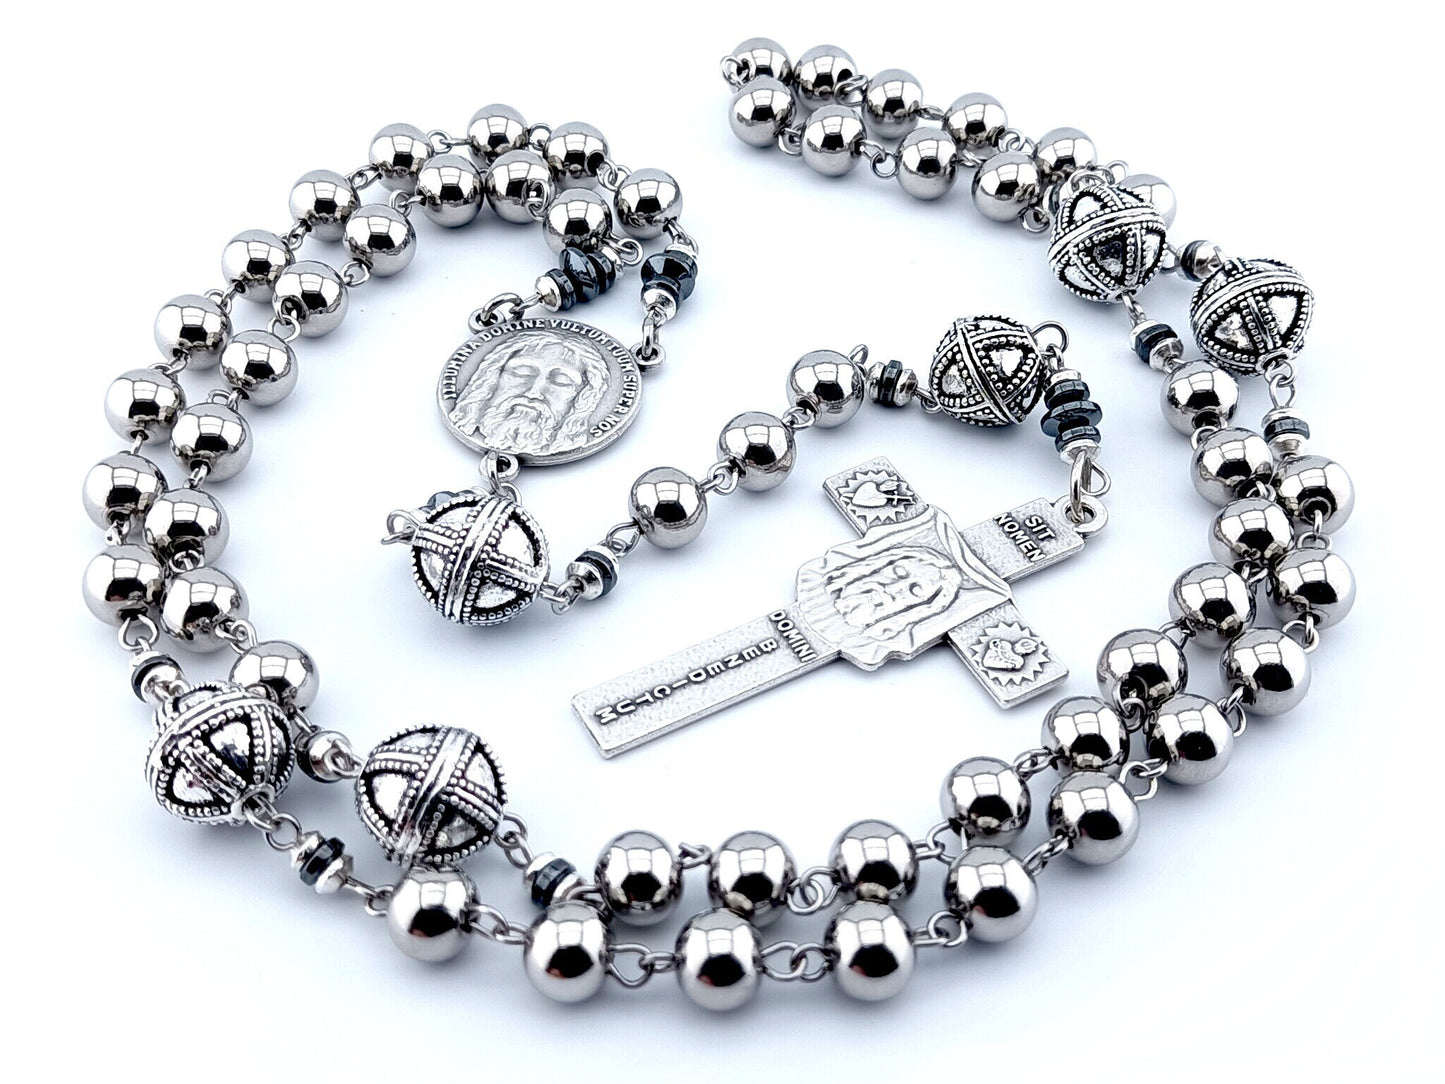 Holy face of Jesus unique rosary beads with stainless steel beads, silver Holy Face crucifix, pater beads and centre medal.